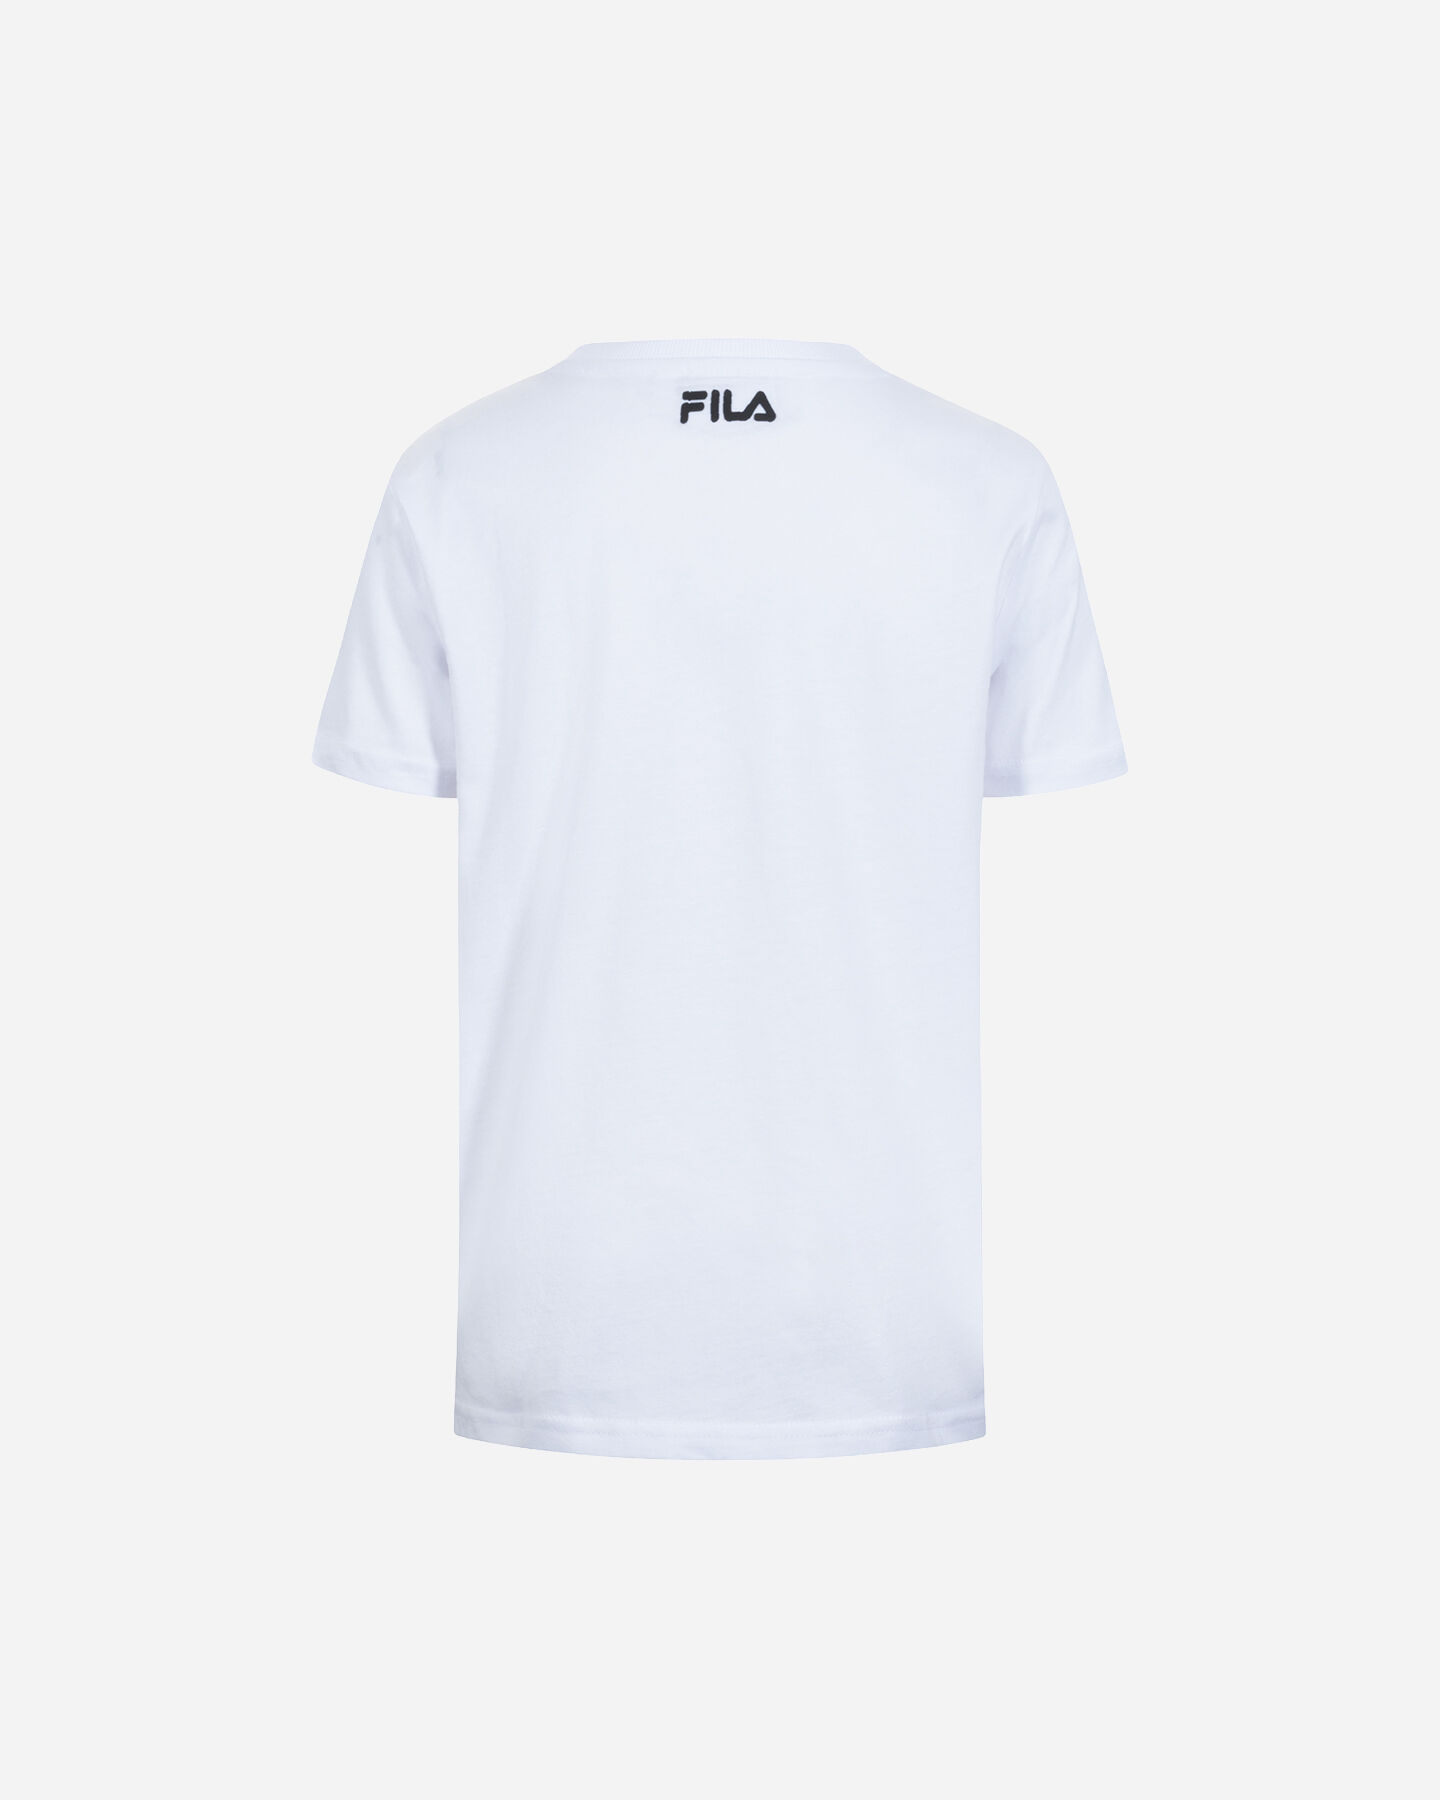  T-Shirt FILA FUNNY POP COLLECTION JR S4130058|001|6A scatto 1